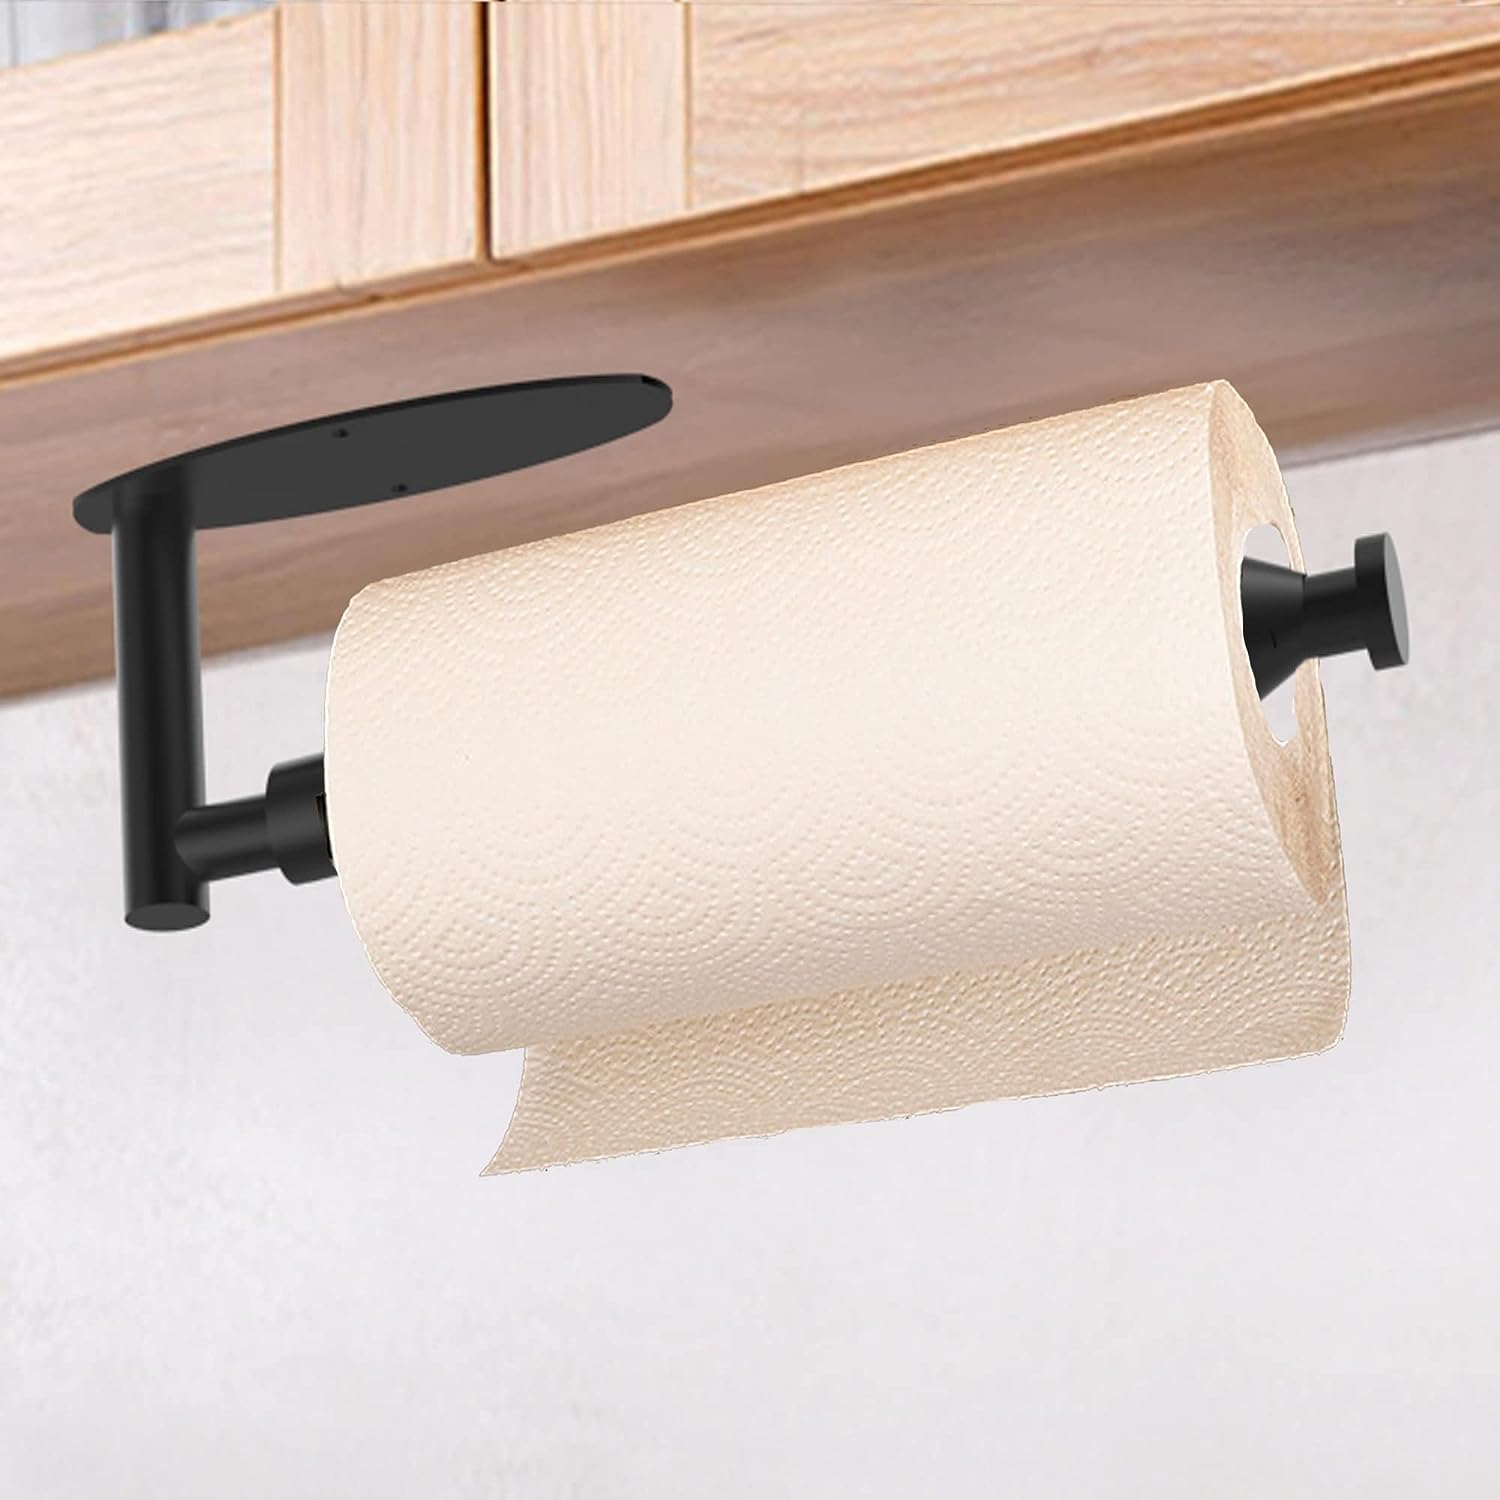 Paper Towel Holder Under Cabinet, Wall Mount Paper Towels Rack for Kitchen, Self Adhesive Hanging Paper Towel Holders for RV Camper, Black